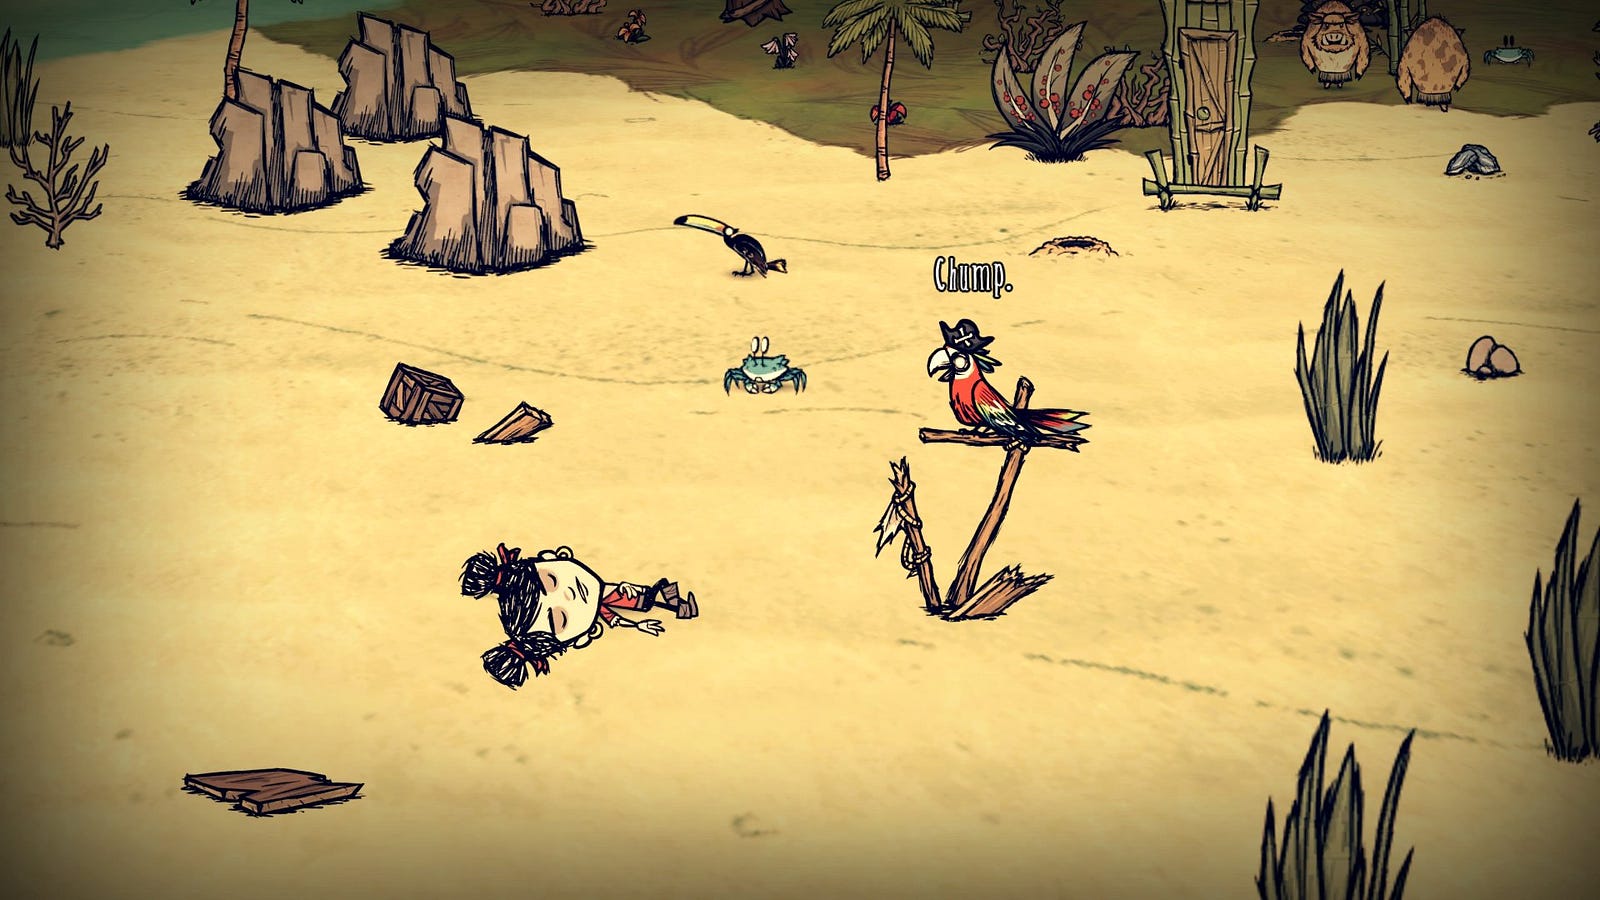 dont starve wiki survial guide sshipwrecked